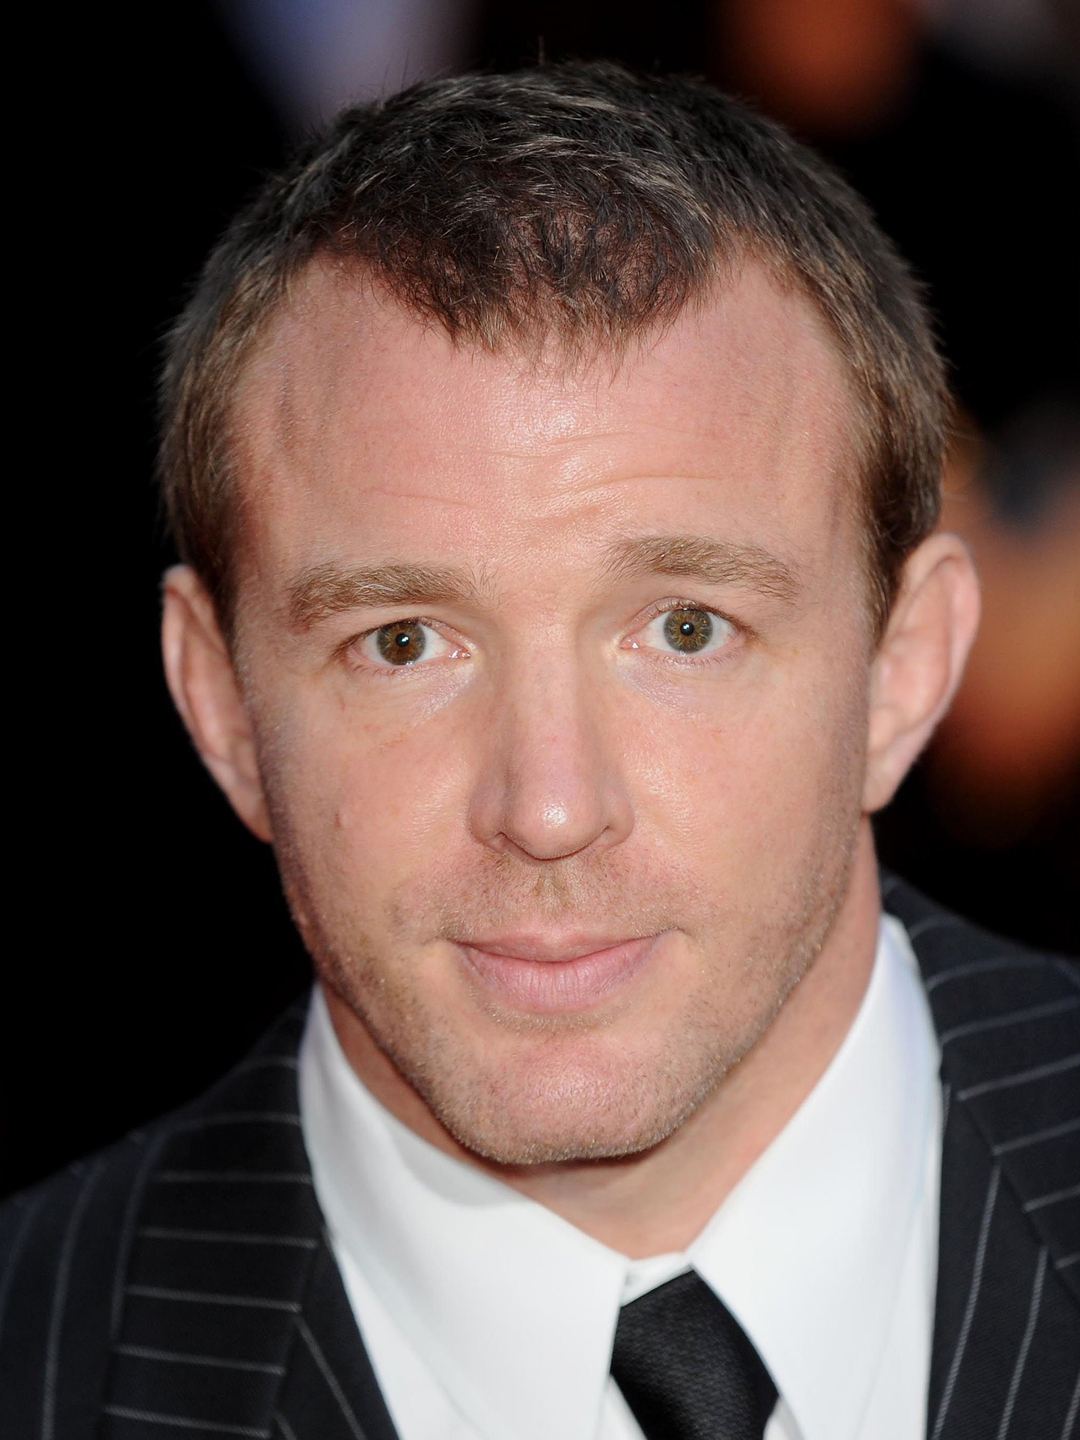 Guy Ritchie young photos